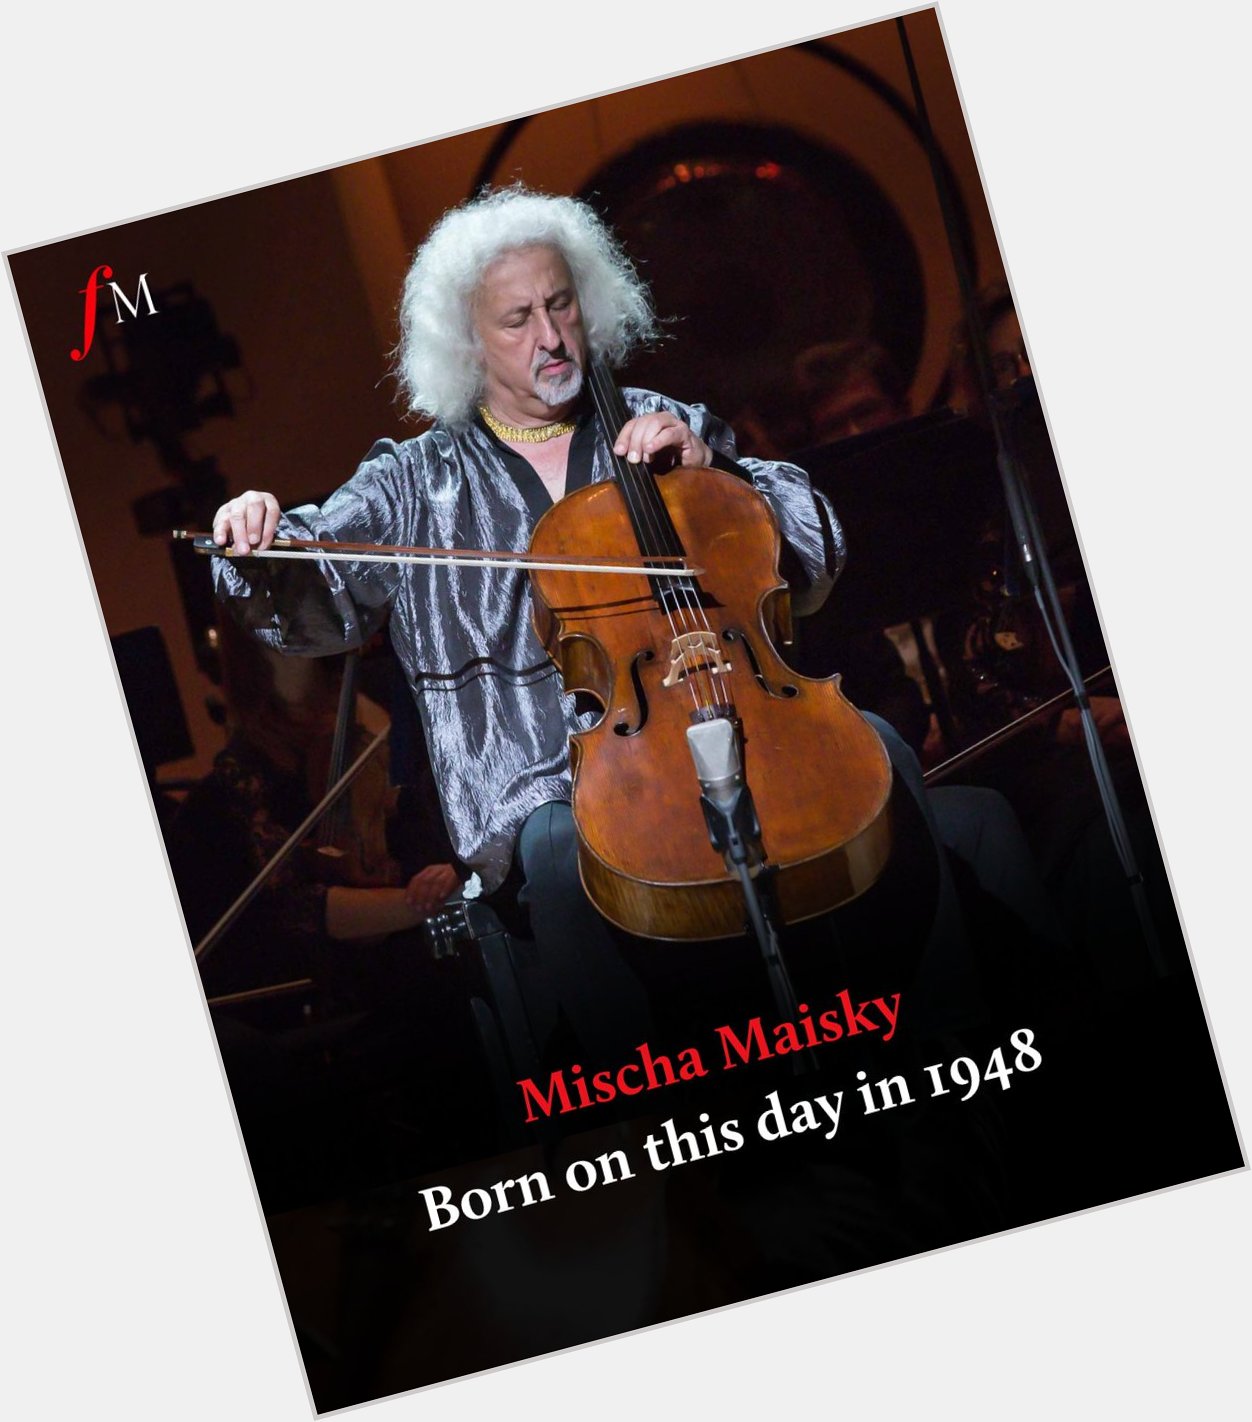 A very happy 75th birthday to star cellist and much-loved musician Mischa Maisky! 